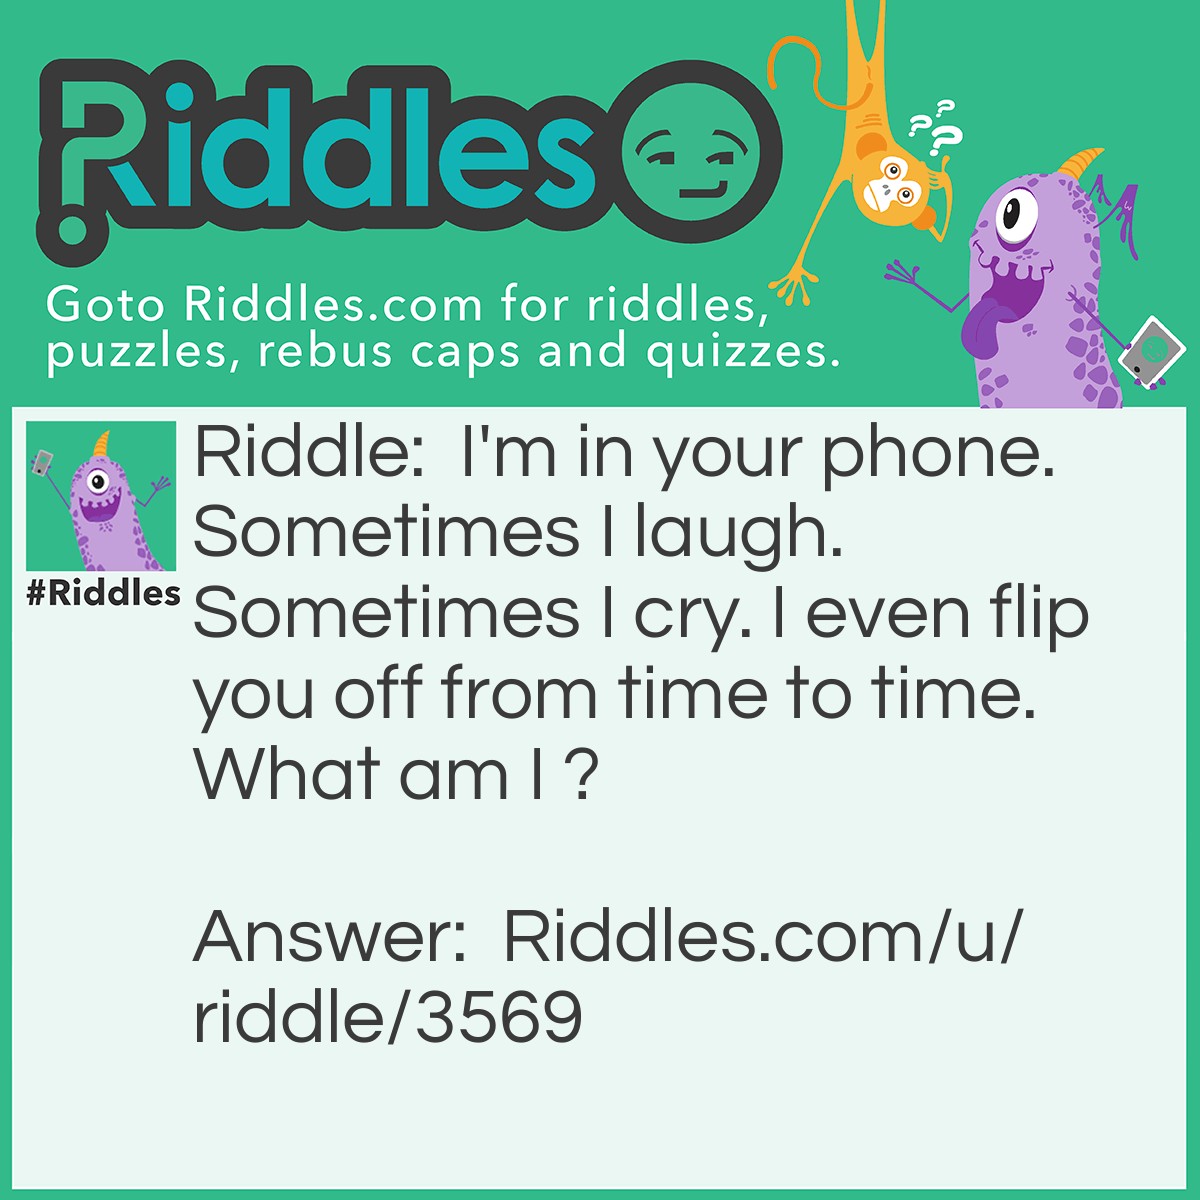 Riddle: I'm on your phone. Sometimes I <a href="https:/www.riddles.com/funny-riddles">laugh</a>. Sometimes I cry. I even flip you off from time to time. What am I? Answer: An emoji.